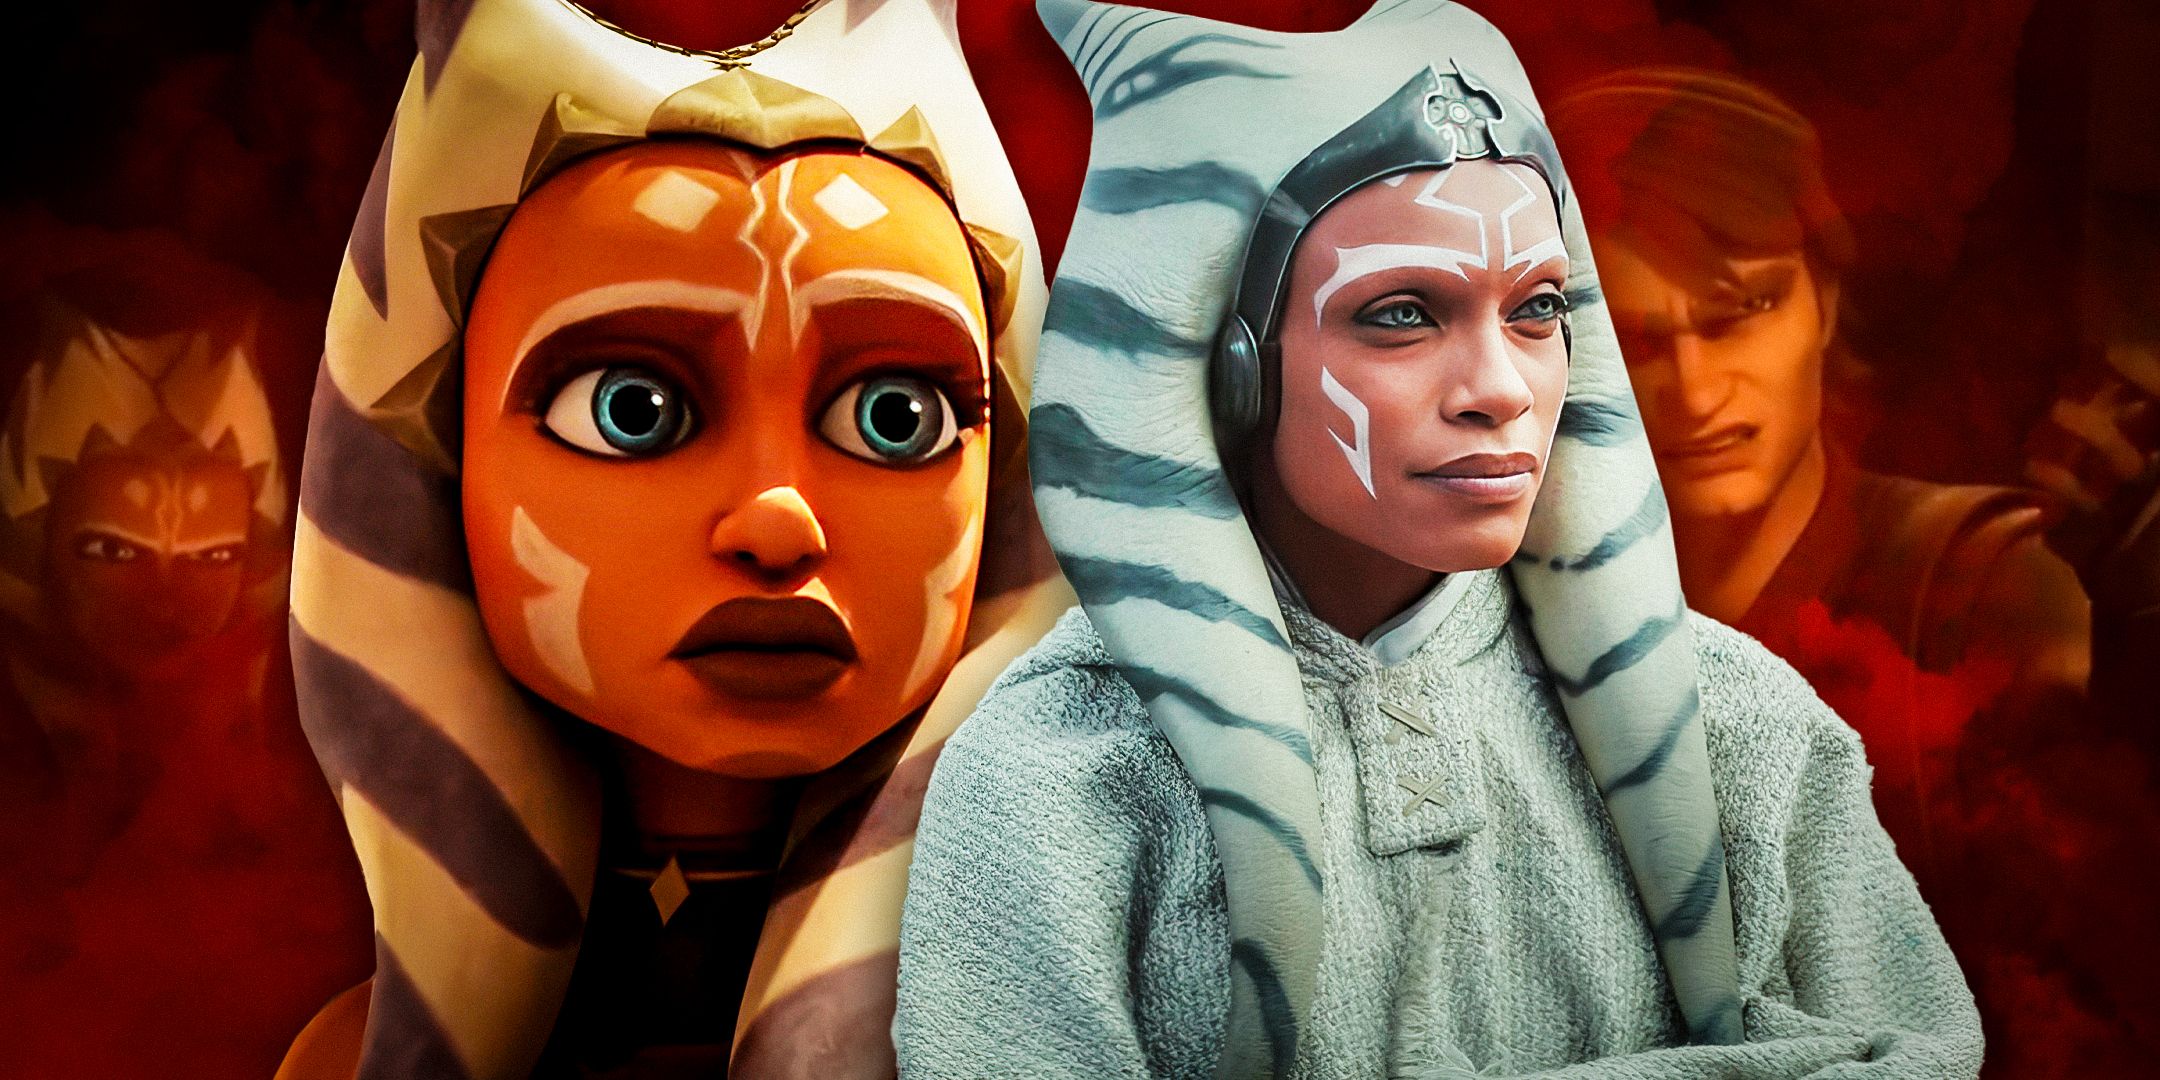 Ahsoka animated looking surprised to the left and Ahsoka in live action to the right with Anakin and Ahsoka in the background